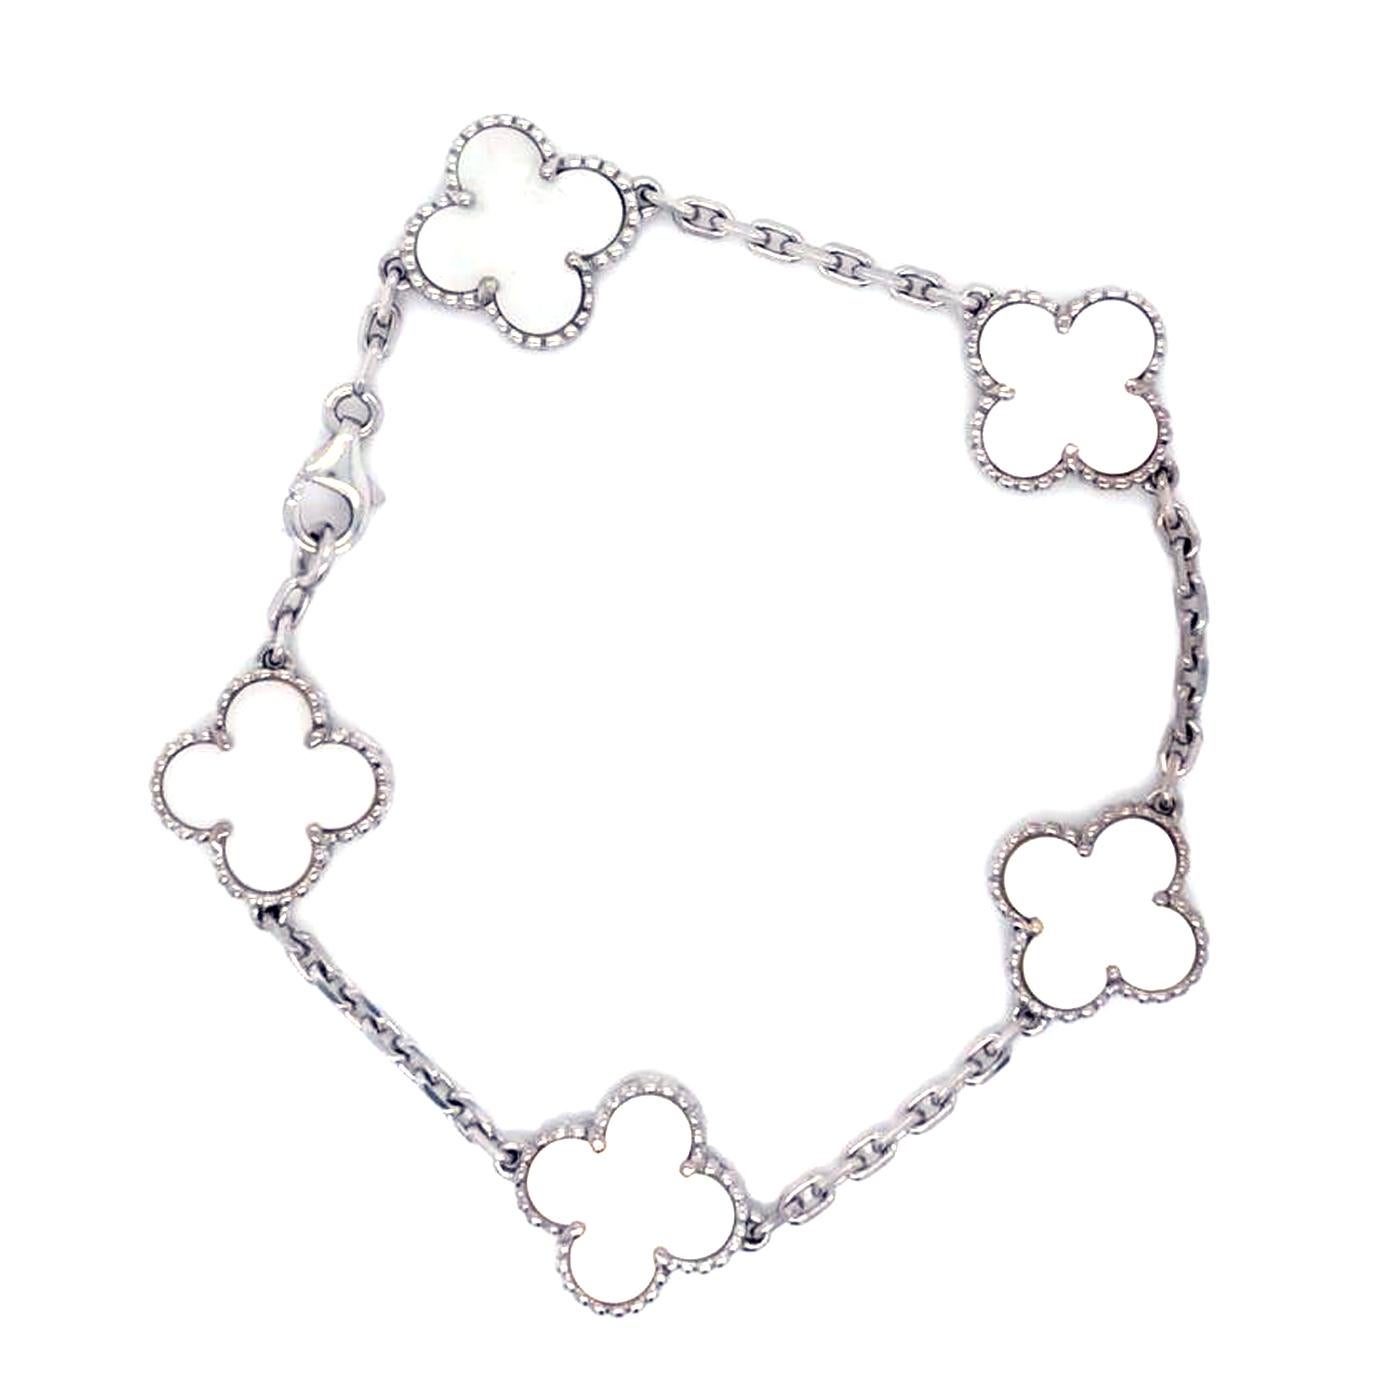 Van Cleef & Arpels Vintage Alhambra Bracelet 5 Motifs White Gold Mother of Pearl

Faithful to the very first Alhambra jewel created in 1968, the Vintage Alhambra creations by Van Cleef & Arpels are distinguished by their unique, timeless elegance.